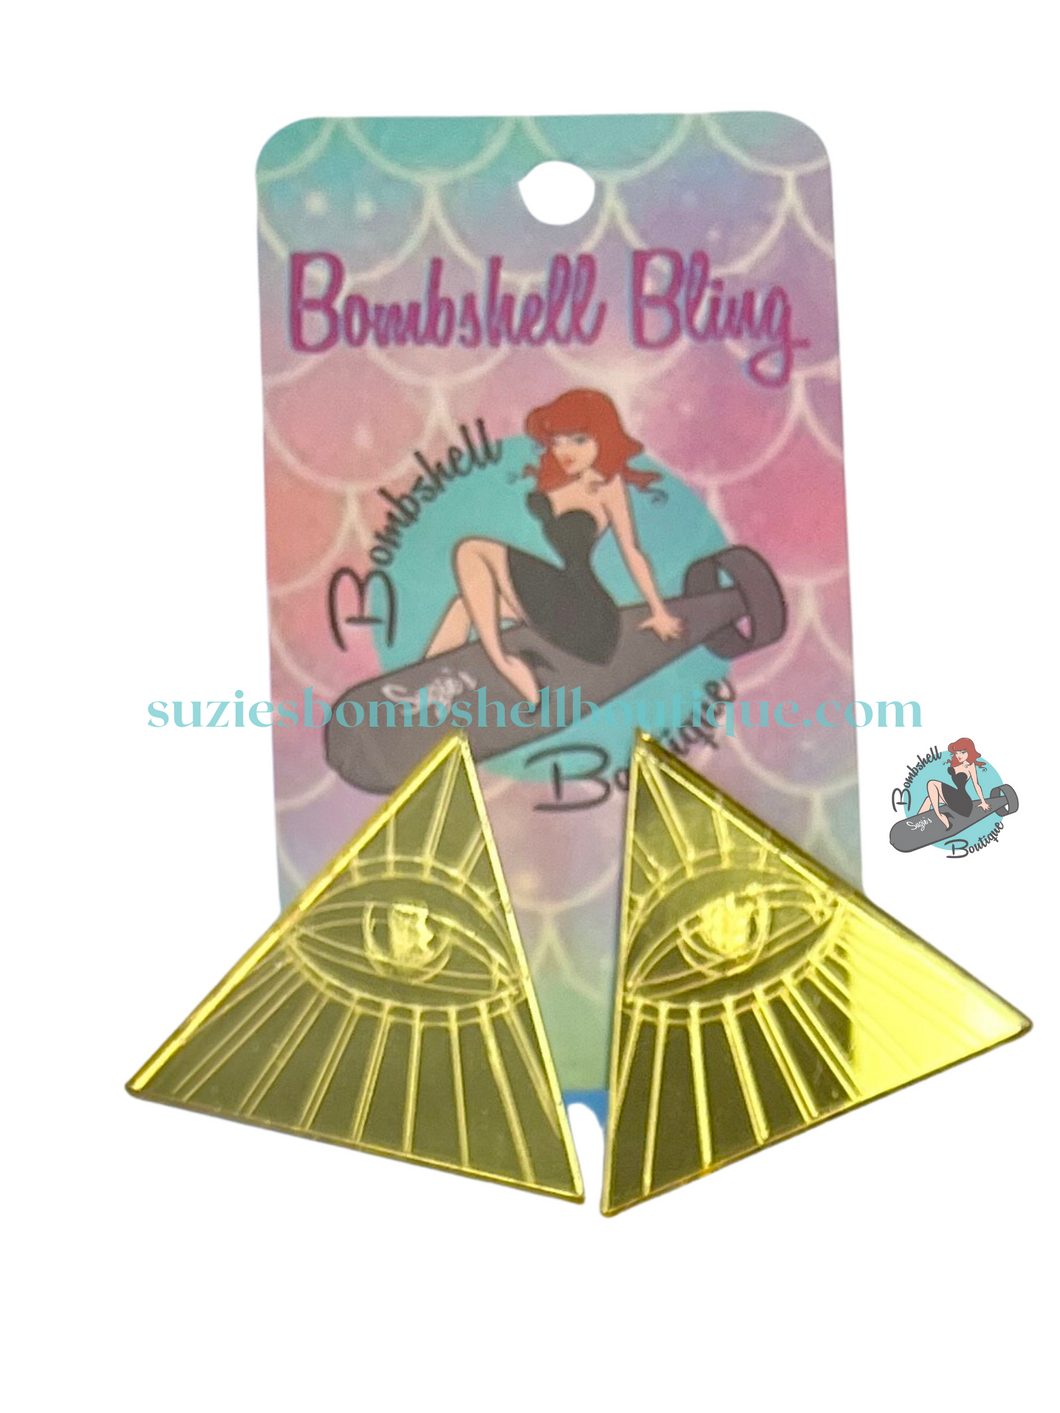 Bombshell Bling Pyramid Power Earrings metallic acrylic earrings in shape of pyramid shiny golden triangle with all seeing eye altfashion pinup resin costume jewellery goth Canadian Pin-Up Shop Suzie's Bombshell Boutique